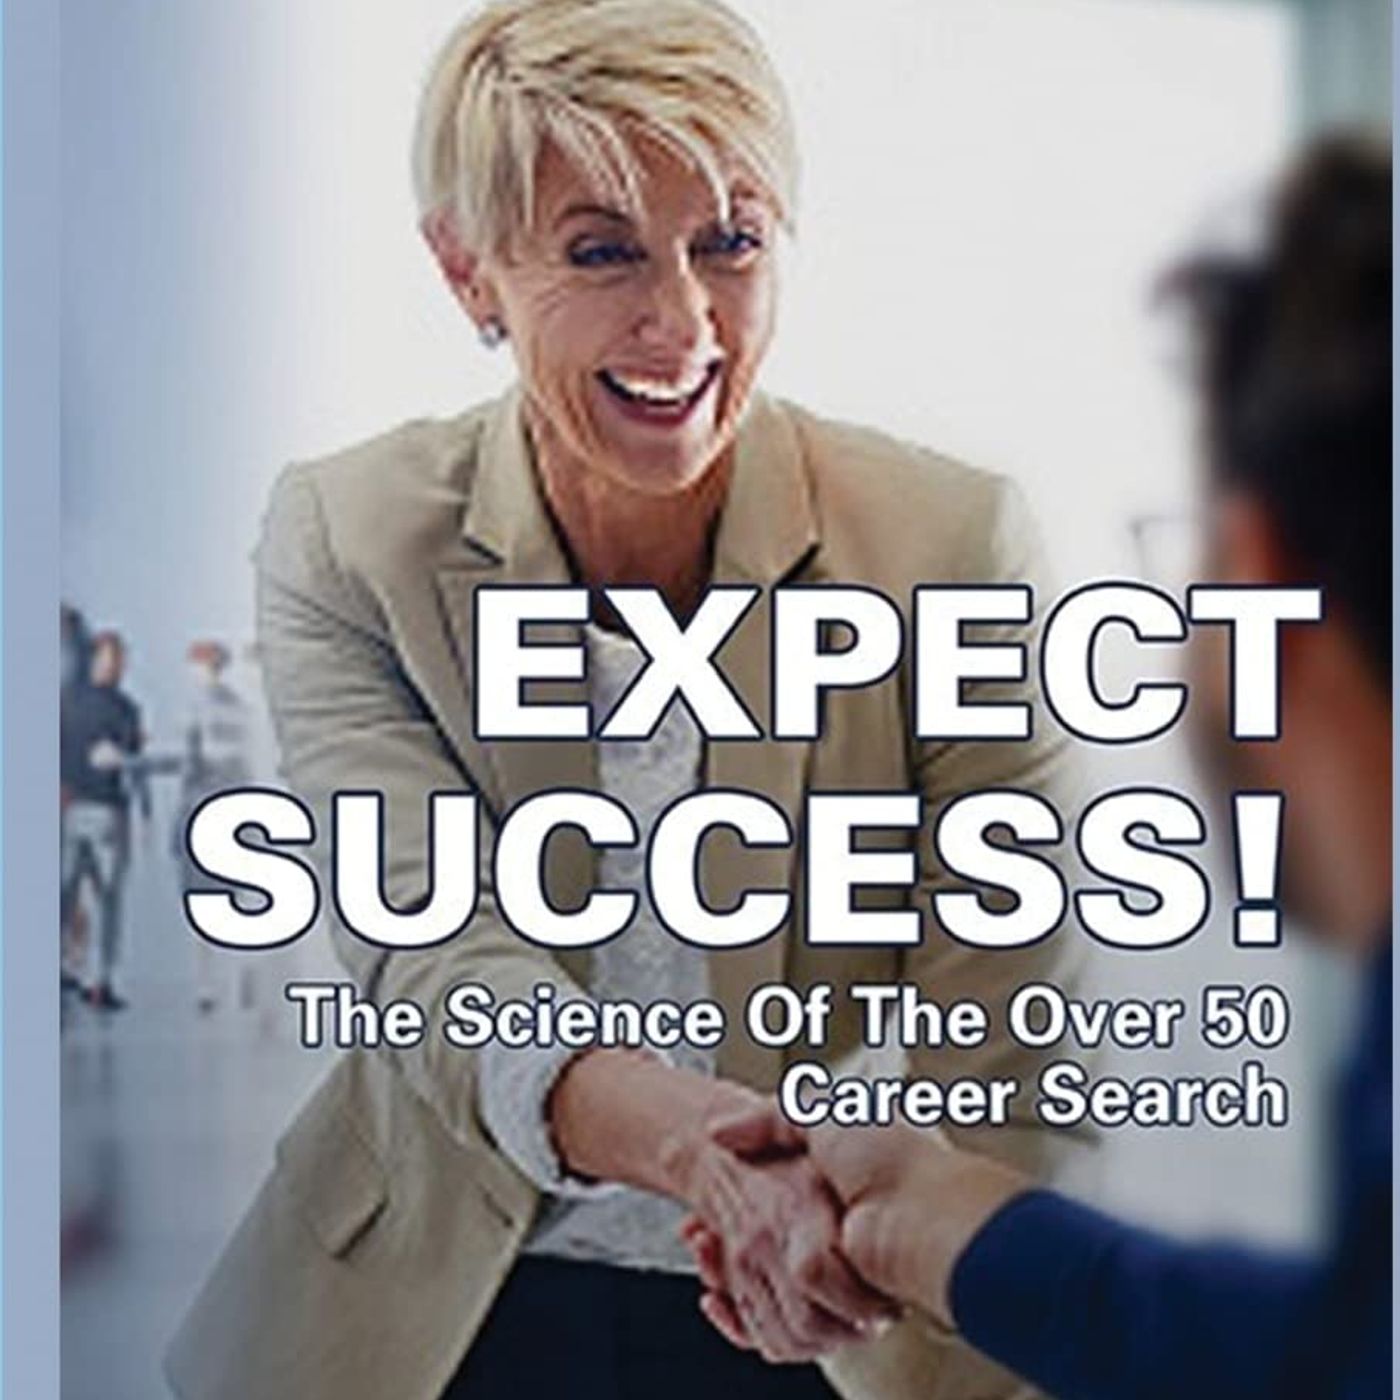 Expect Success - The Science of the Over 50 Career Search - Bill Humbert